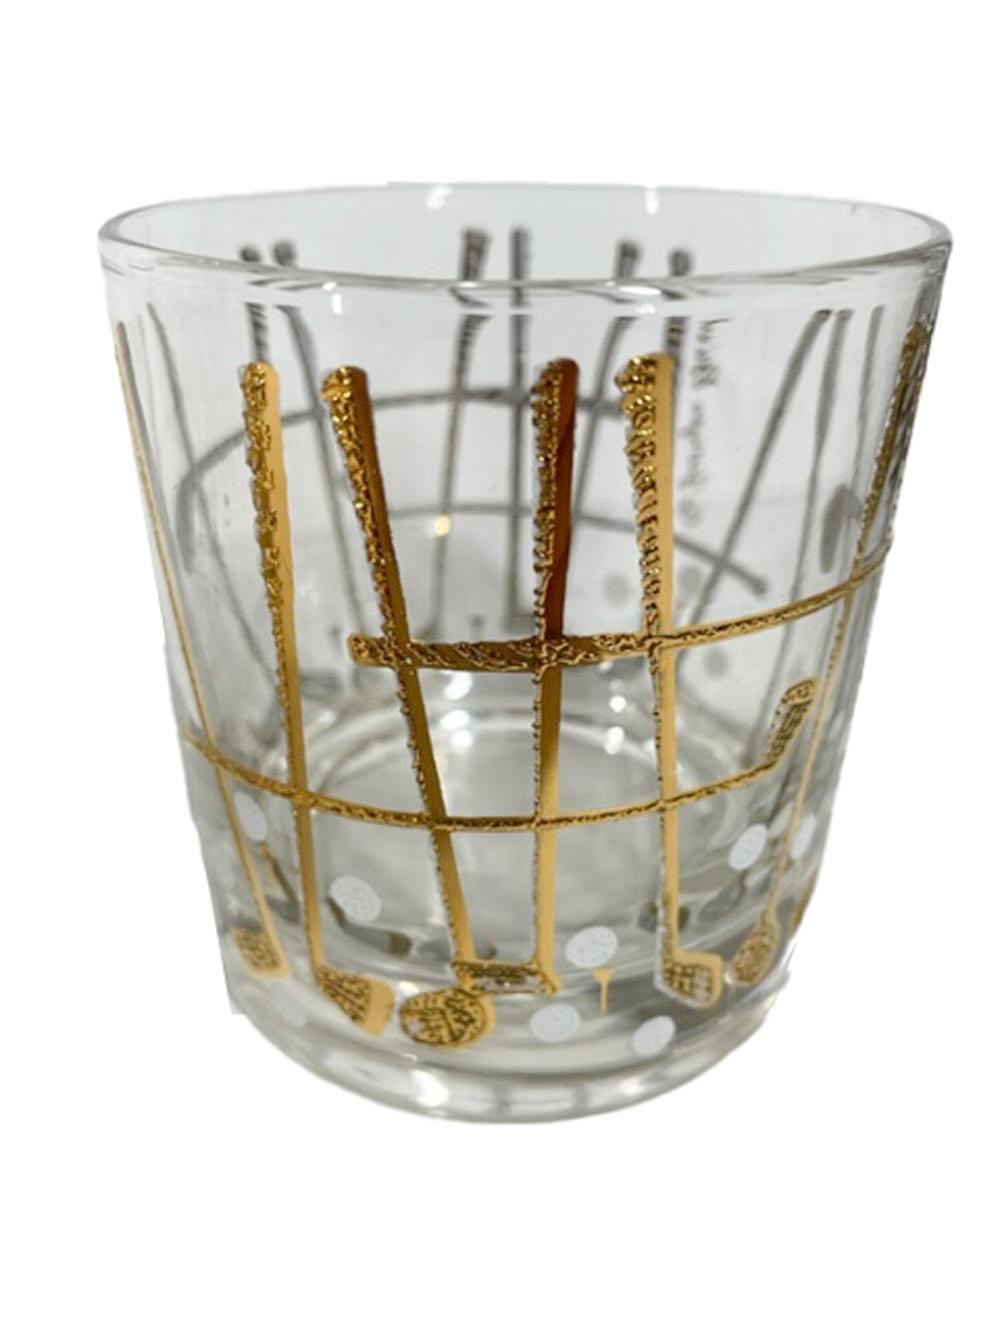 American Vintage Georges Briard Rocks Glasses in the Golf Pattern Executed in 22k Gold